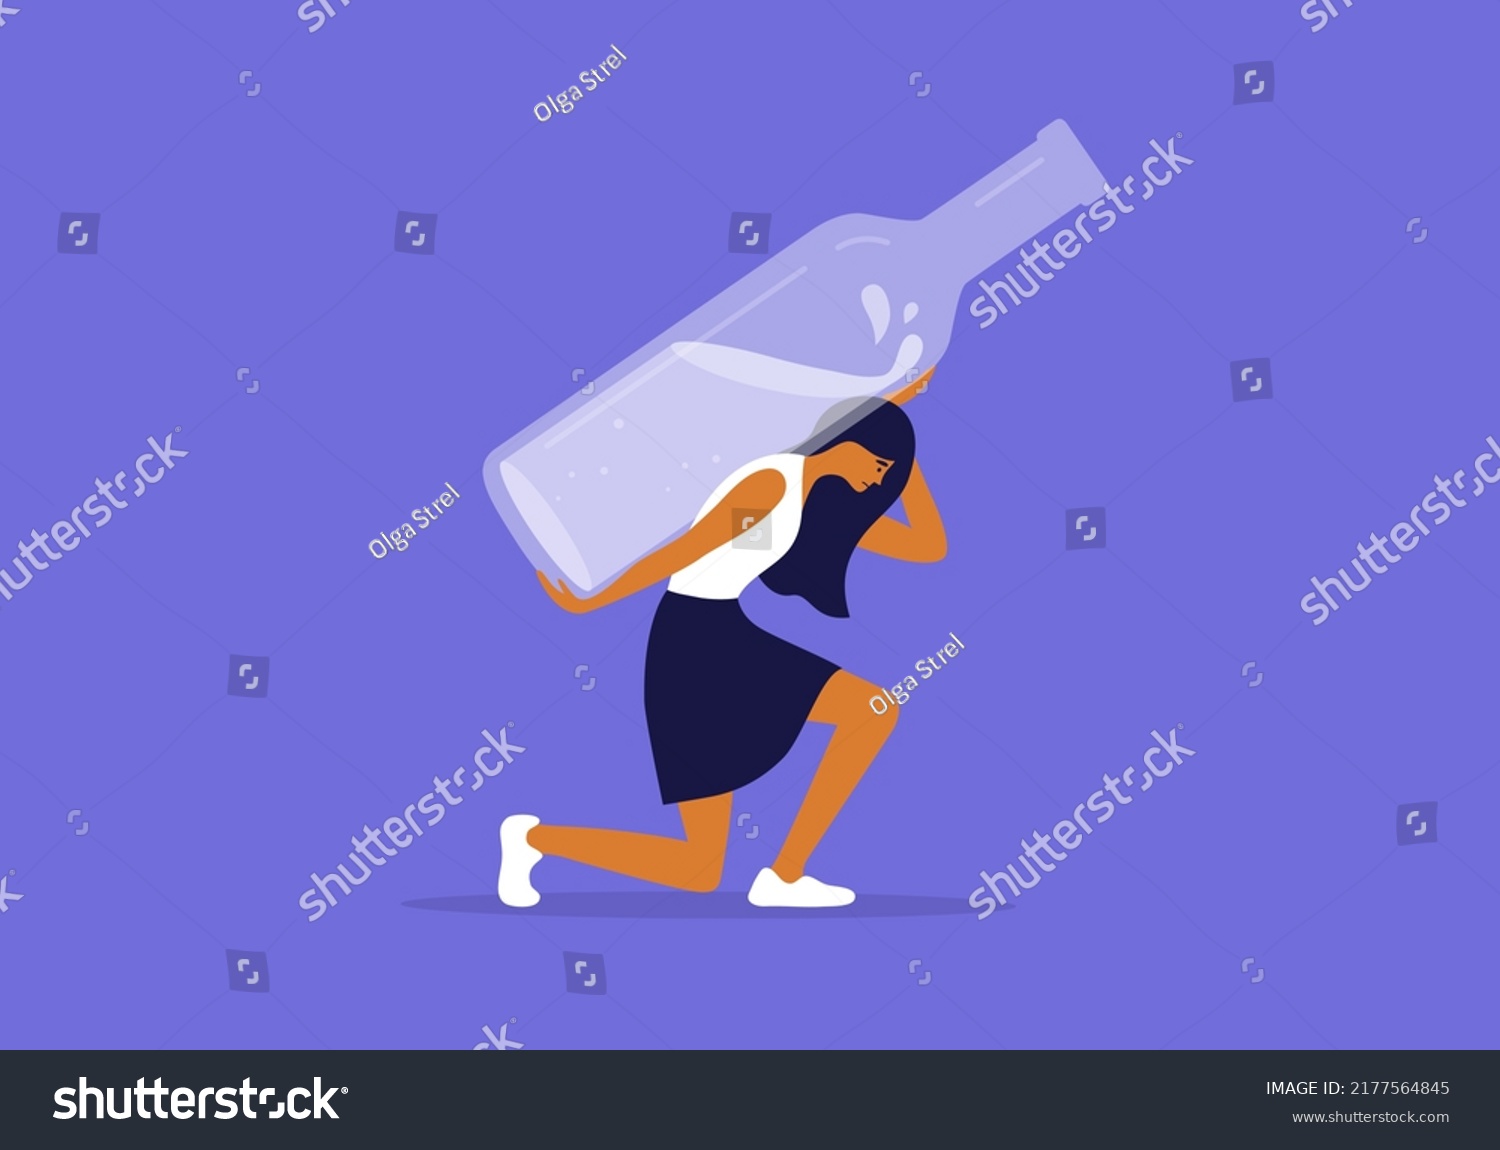 SVG of Alcoholism abuse vector Illustration. Woman holding huge alcohol drink bottle on shoulders. Sad unhappy female person carrying heavy alco addiction. Social issue concept, drunk wife, alcoholic mother svg